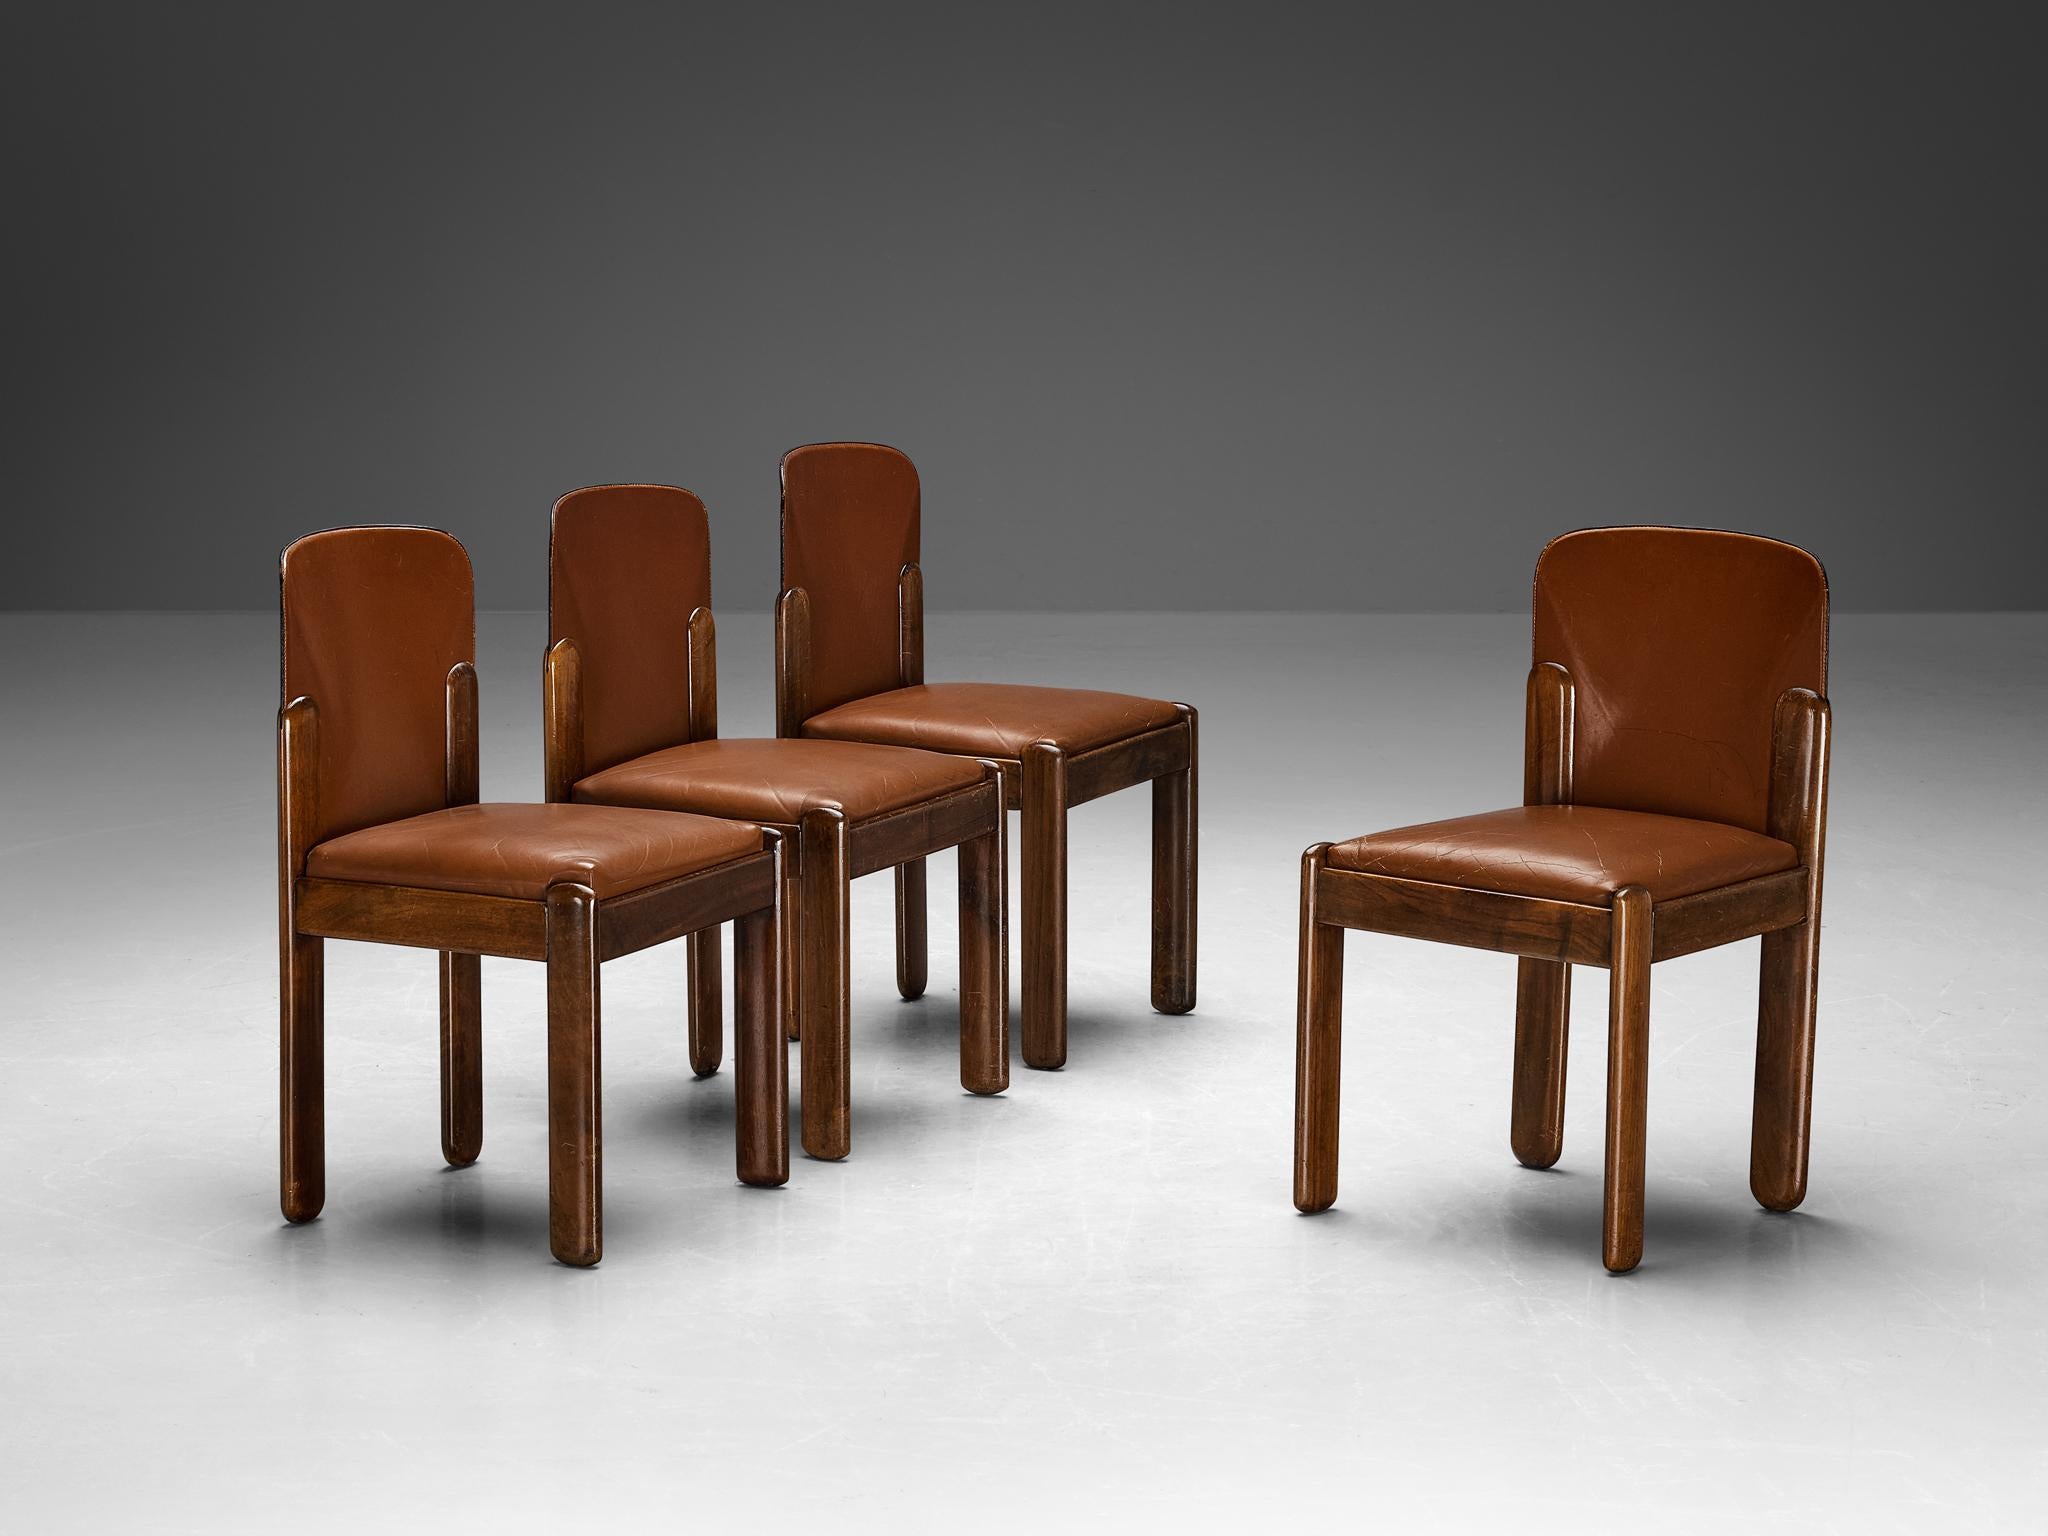 Silvio Coppola for Bernini, set of four dining chairs model 330, leather, walnut, Italy, 1960s.

This magnificent set of dining chairs by the renowned Italian designer Silvio Coppola is a remarkable display of aesthetic harmony, distinguished by a